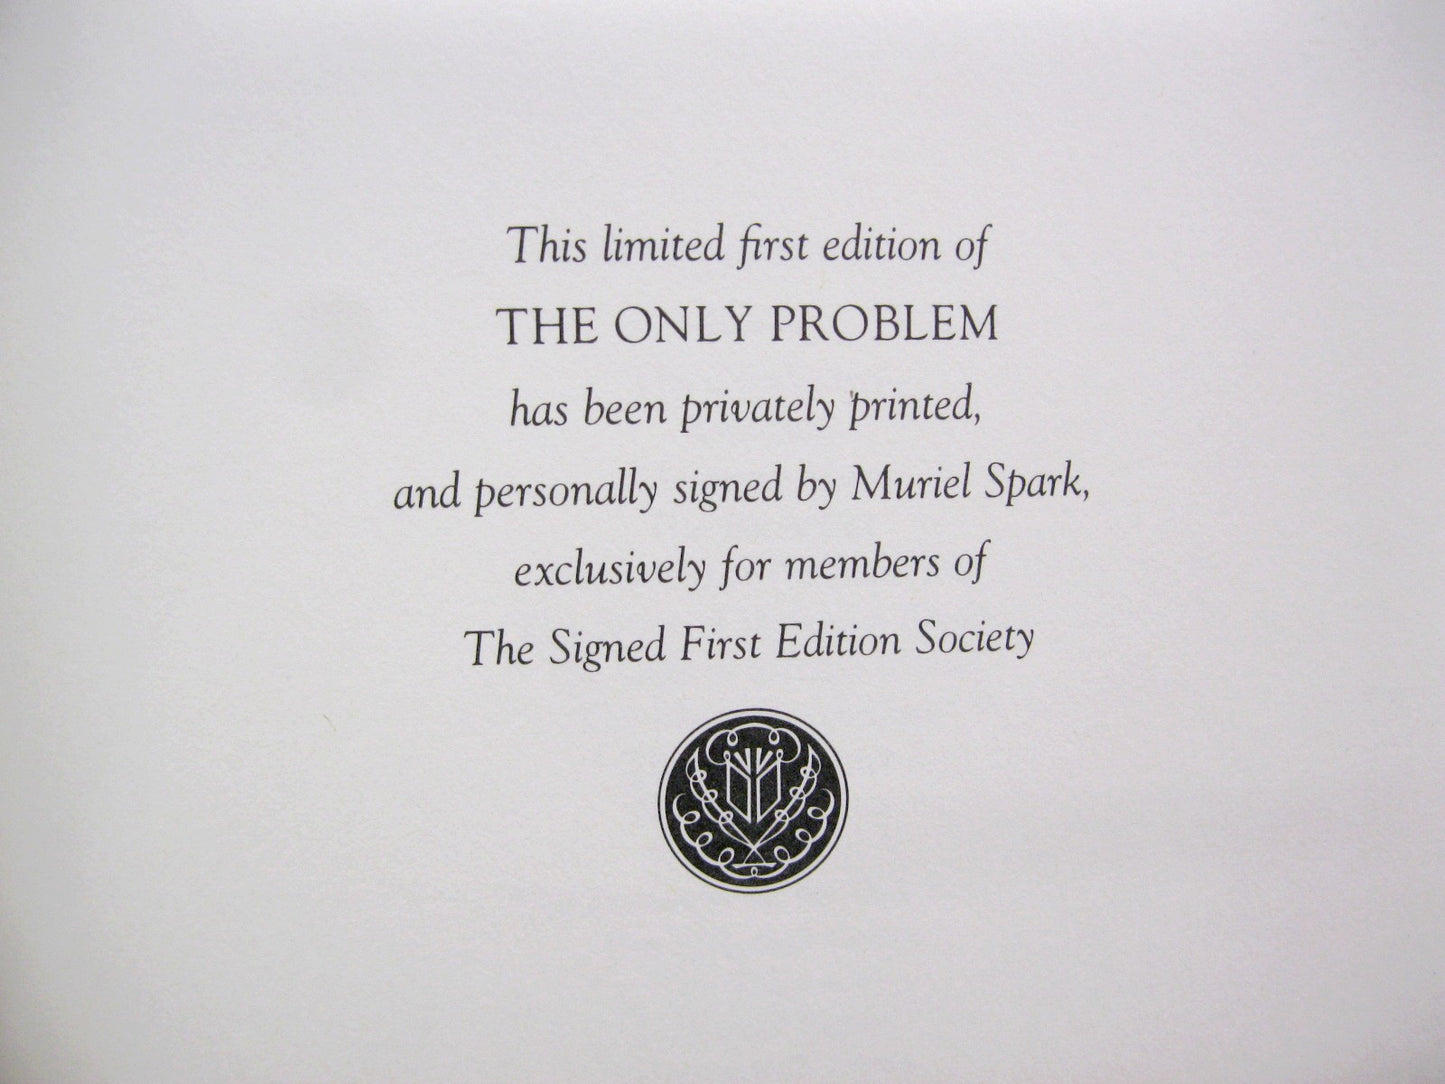 The Only Problem by Muriel Spark